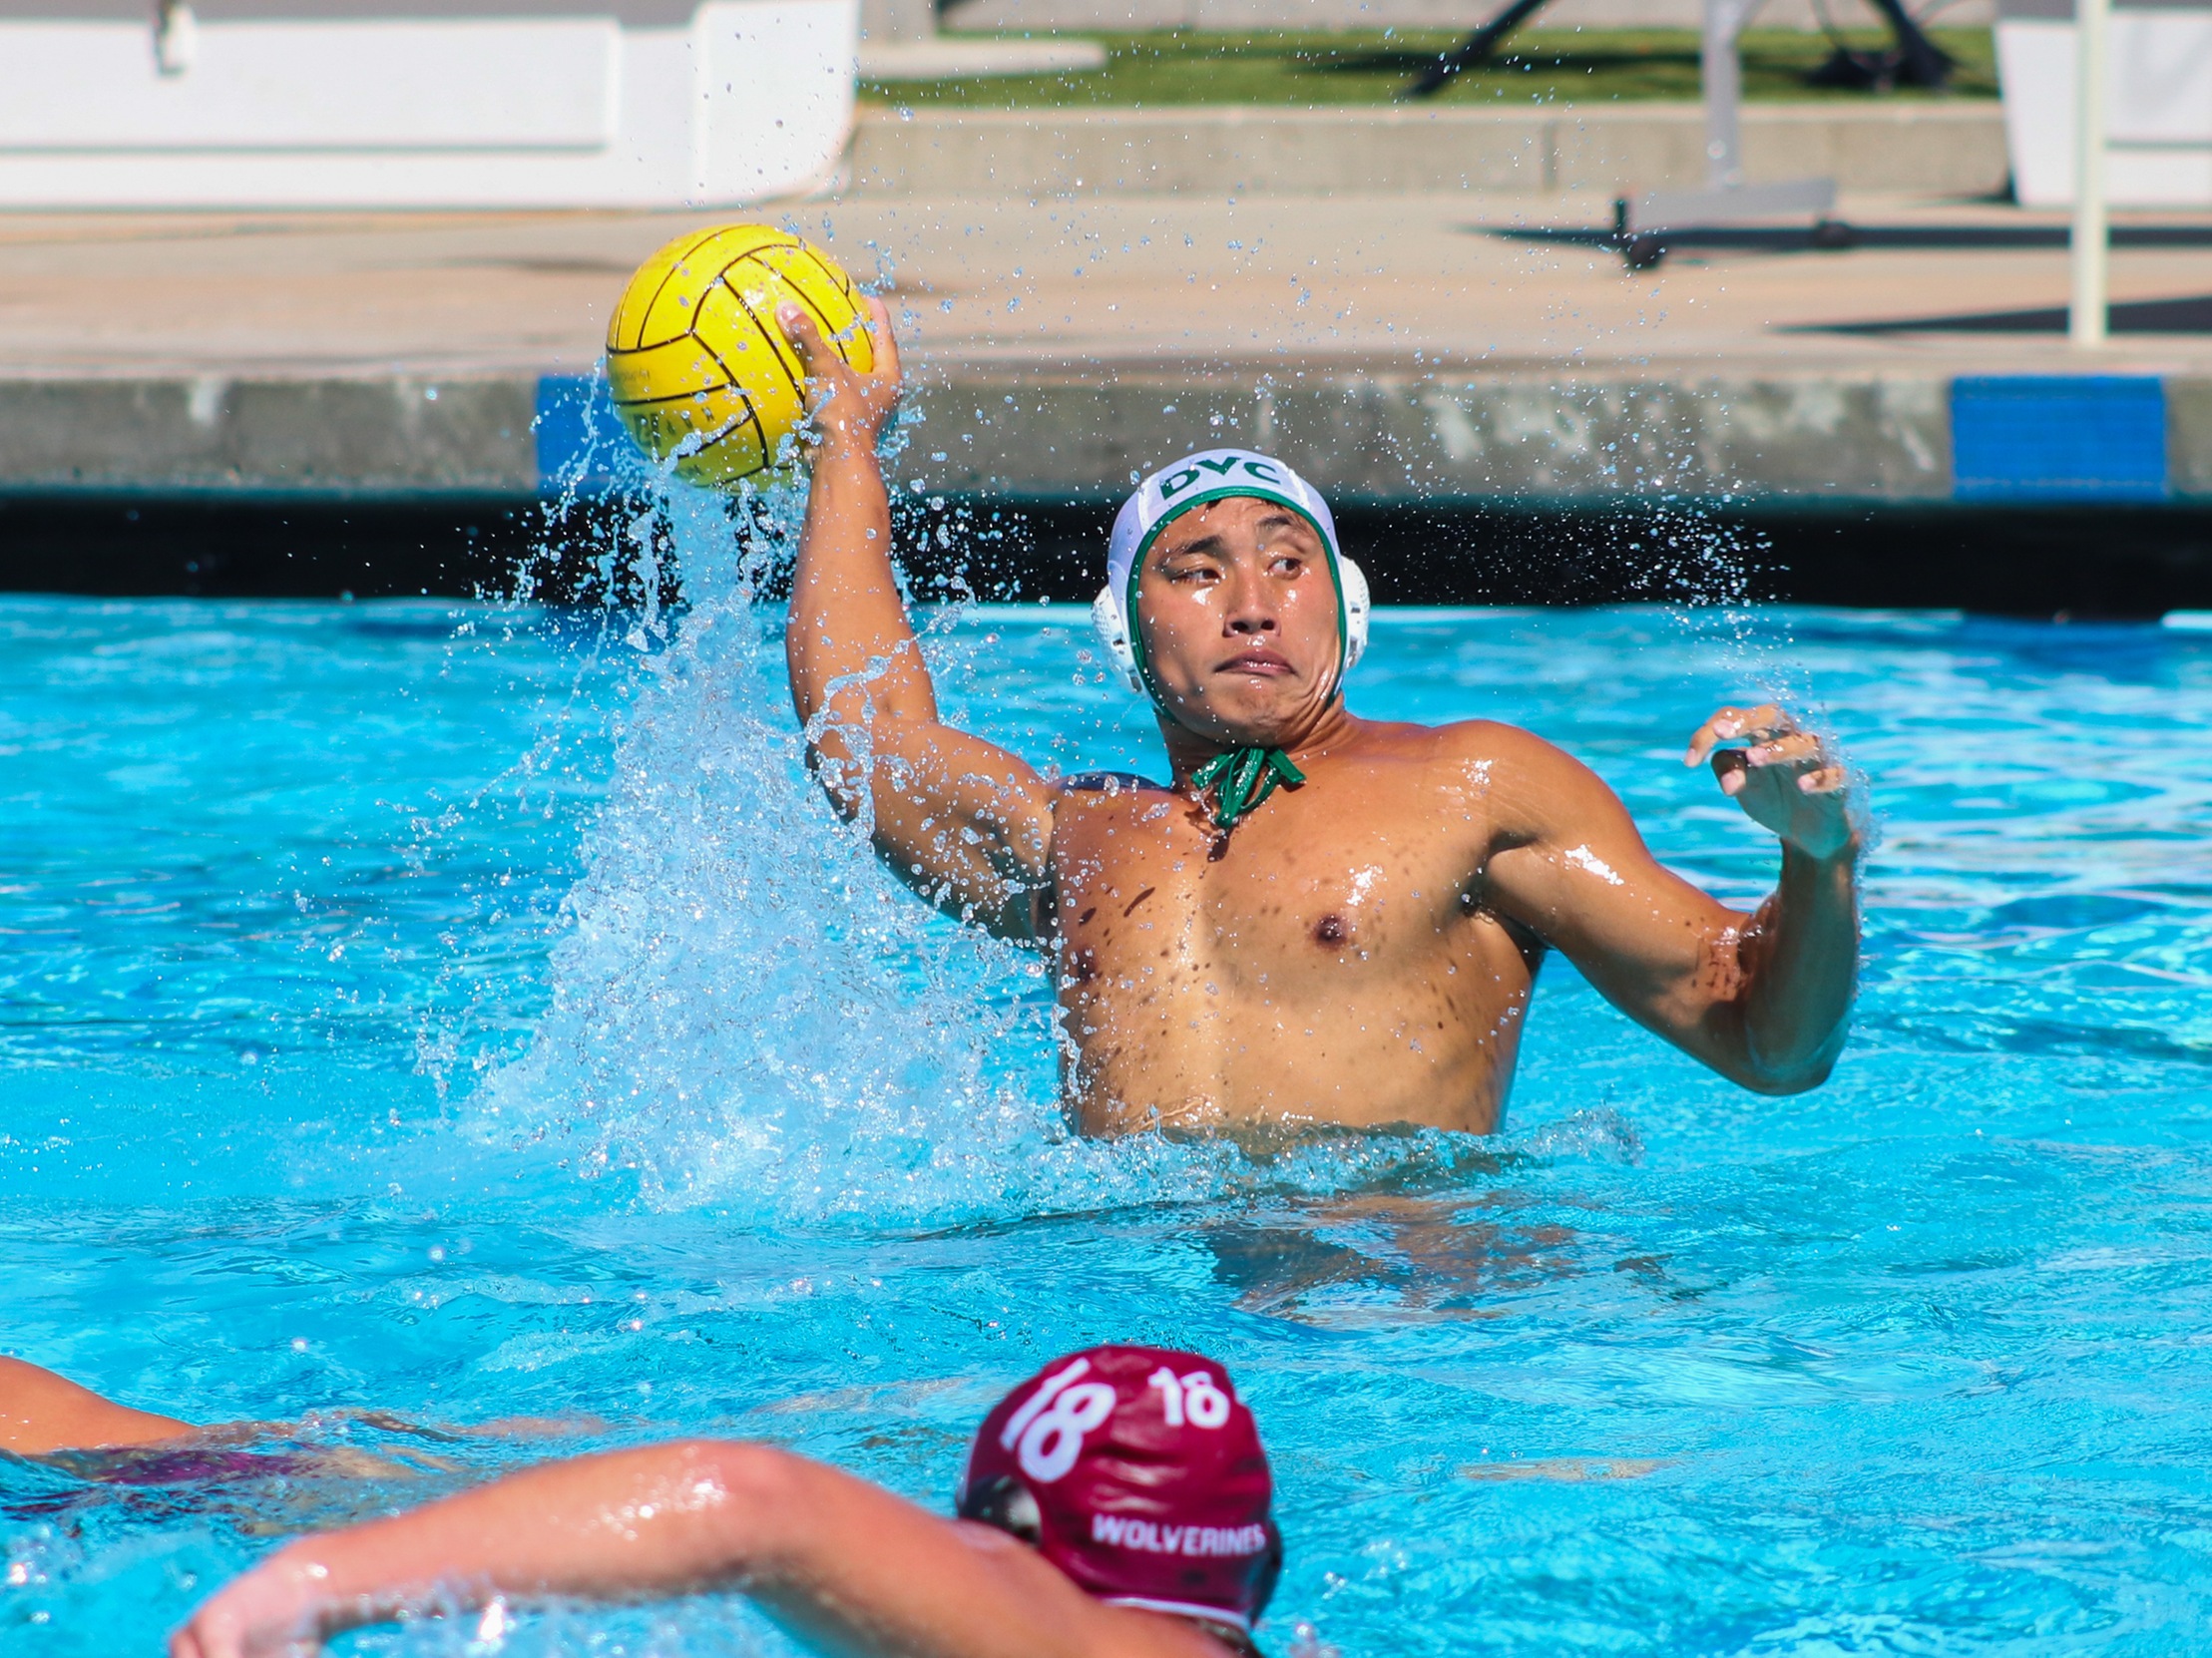 Vikings go 4-0 at Ohlone Tournament, move to 8-1 on the season